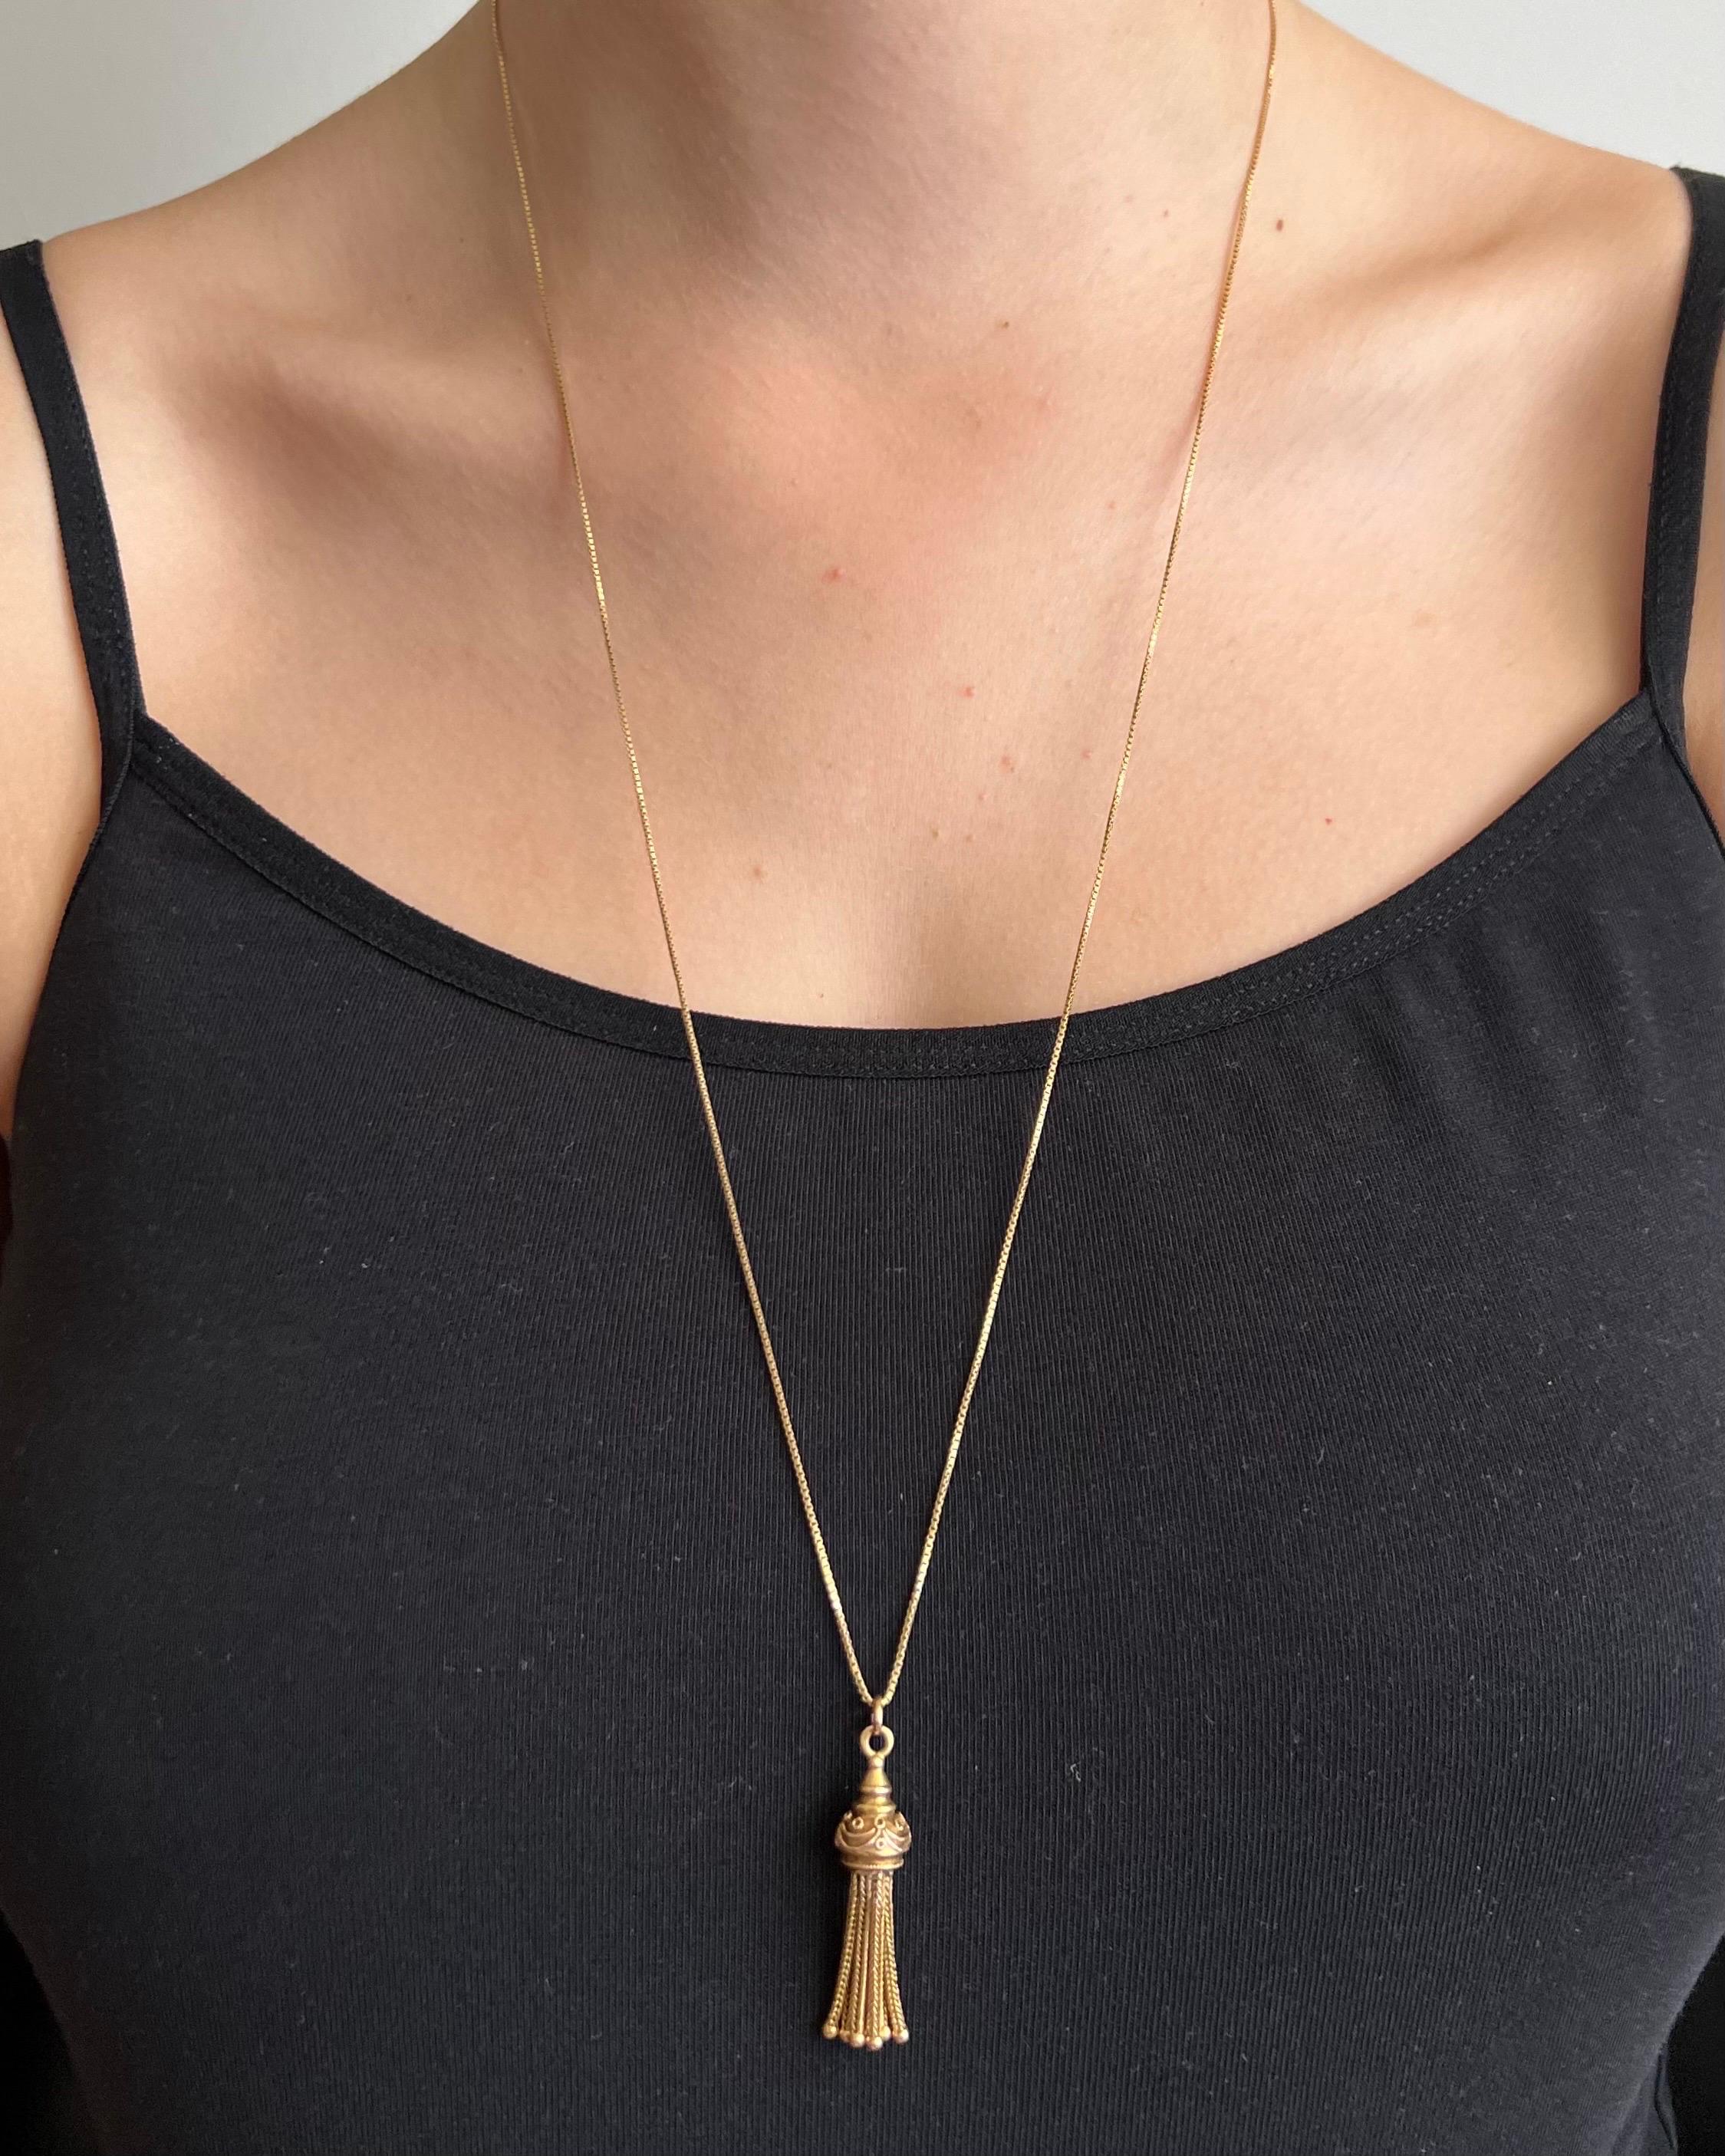 An antique box chain necklace set with a tassel pendant. The box chain necklace is made of 18 karat and the lovely tassel adorned with rope decor is made of 14 karat gold. The box chain is also called 